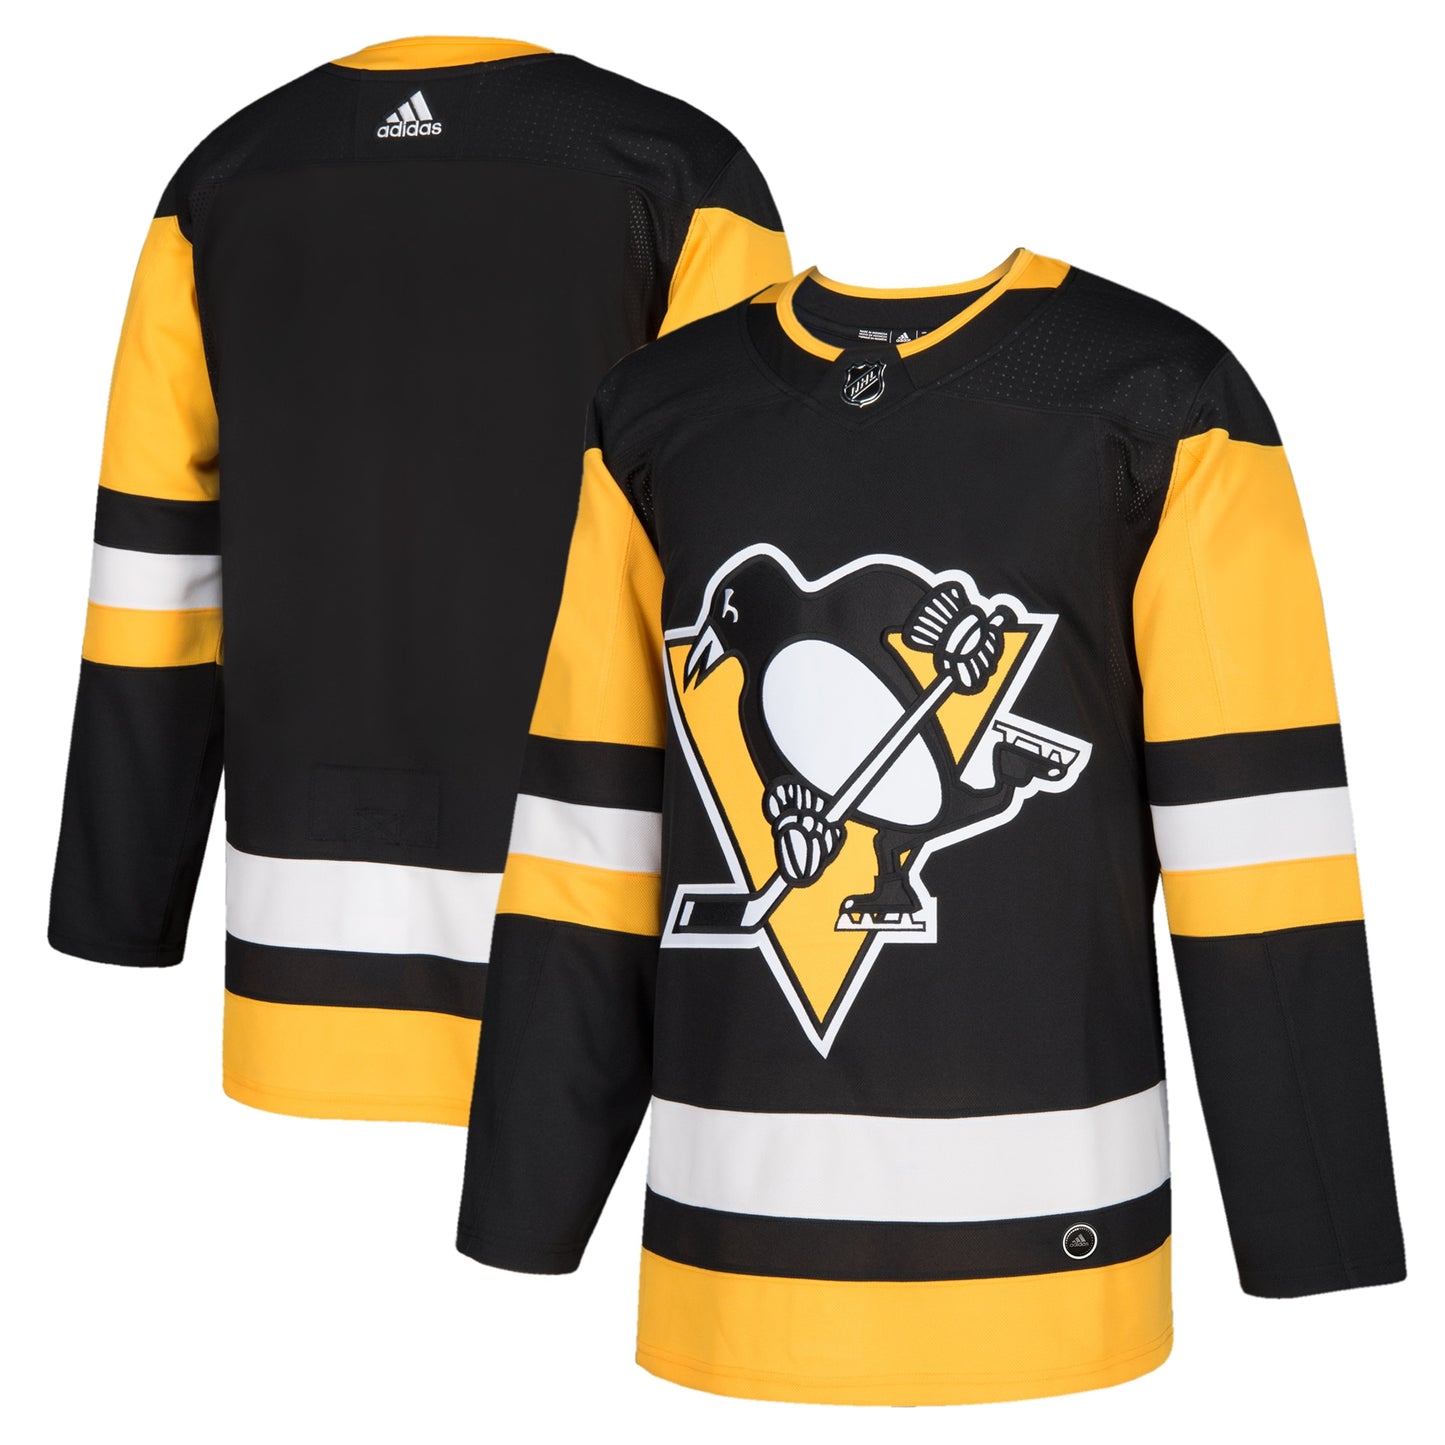 Pittsburgh Penguins adidas Home Authentic Blank Jersey - Black